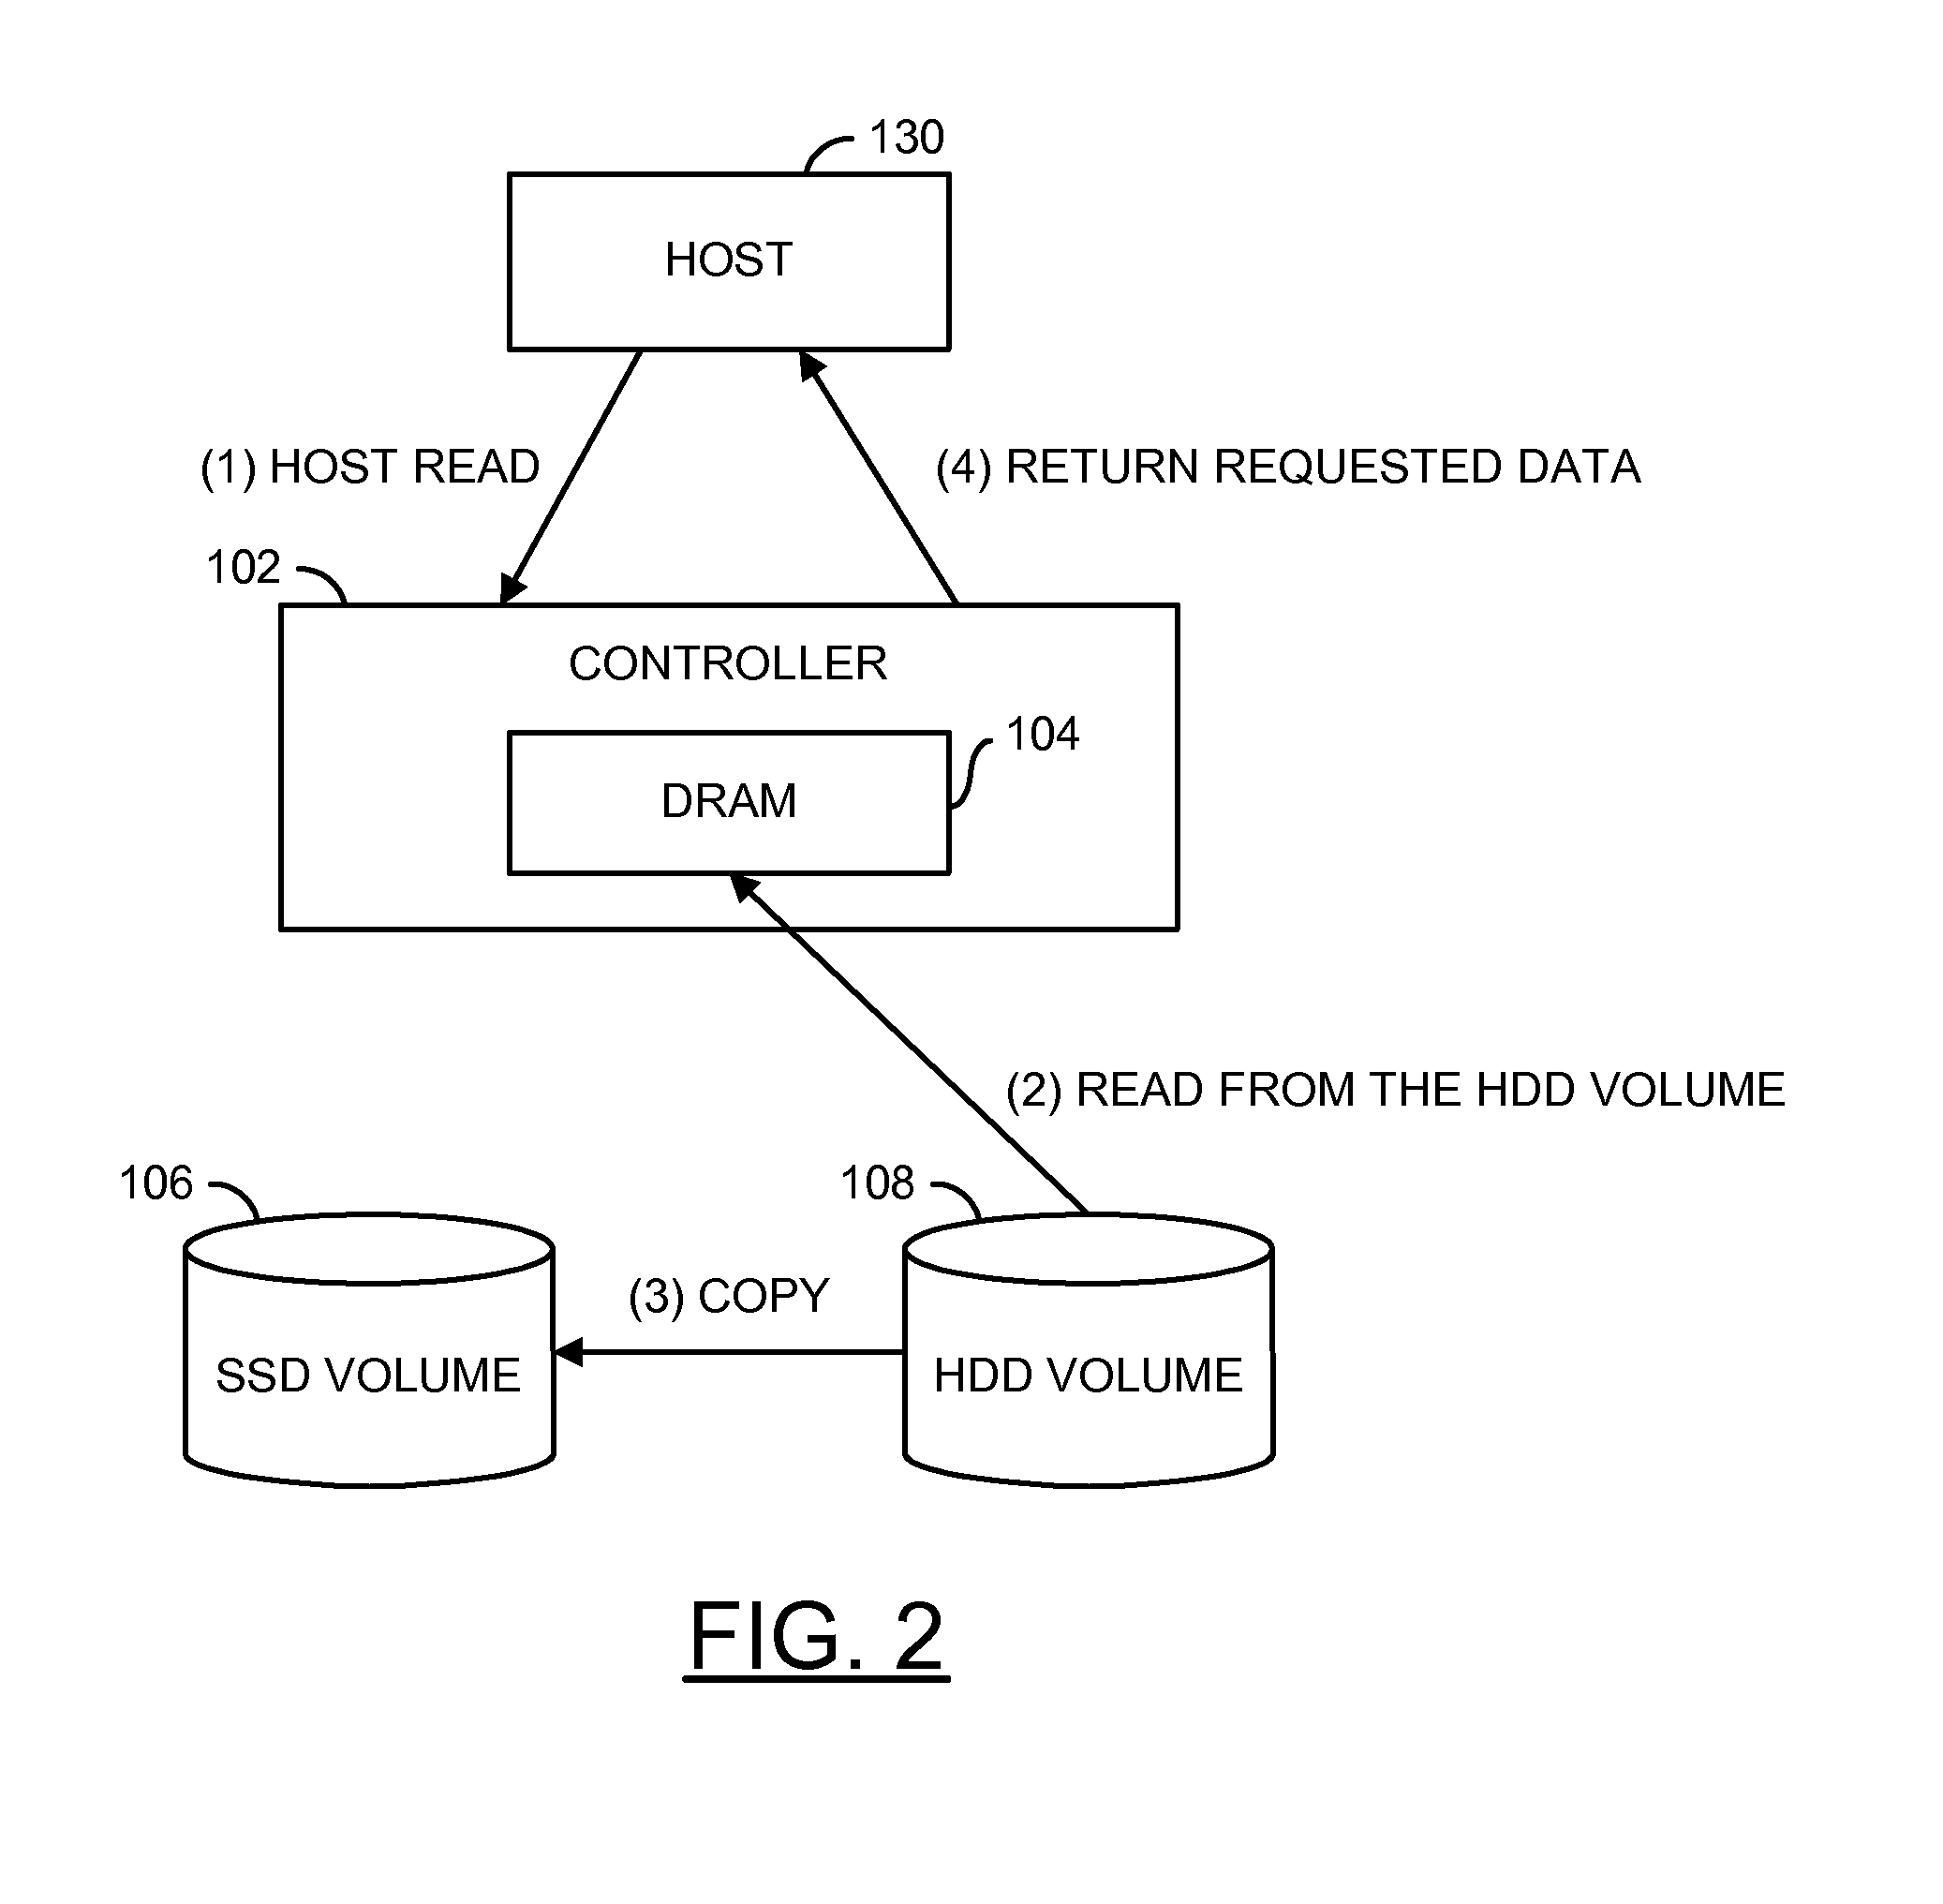 Method to improve the performance of a read ahead cache process in a storage array